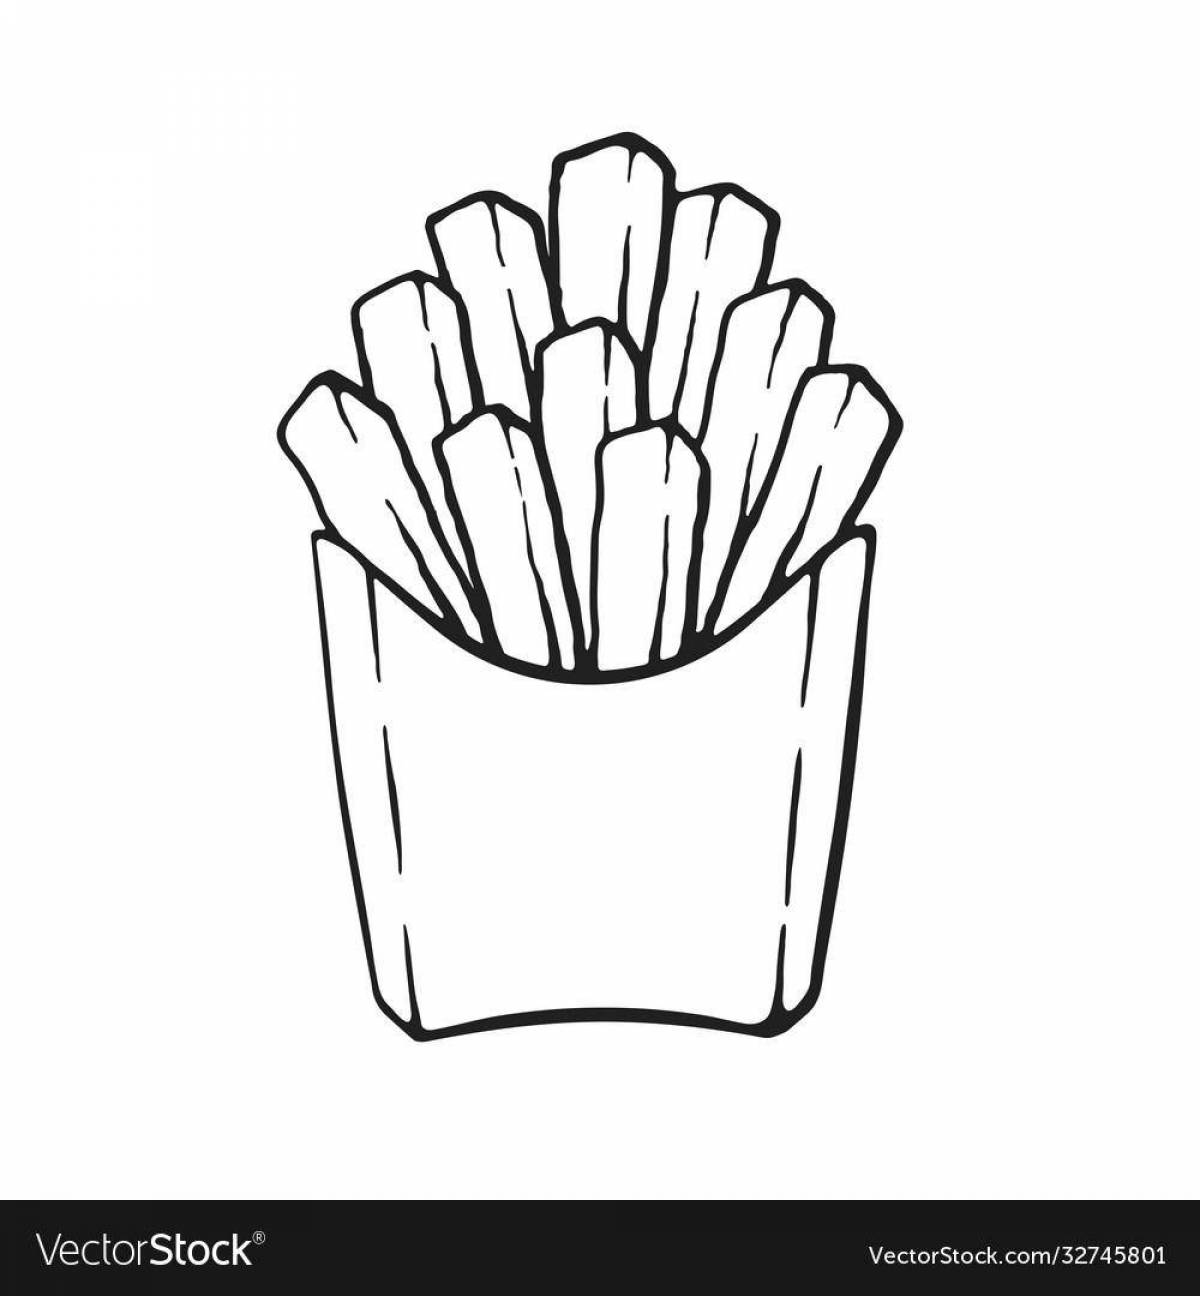 Exciting french fries coloring book for kids